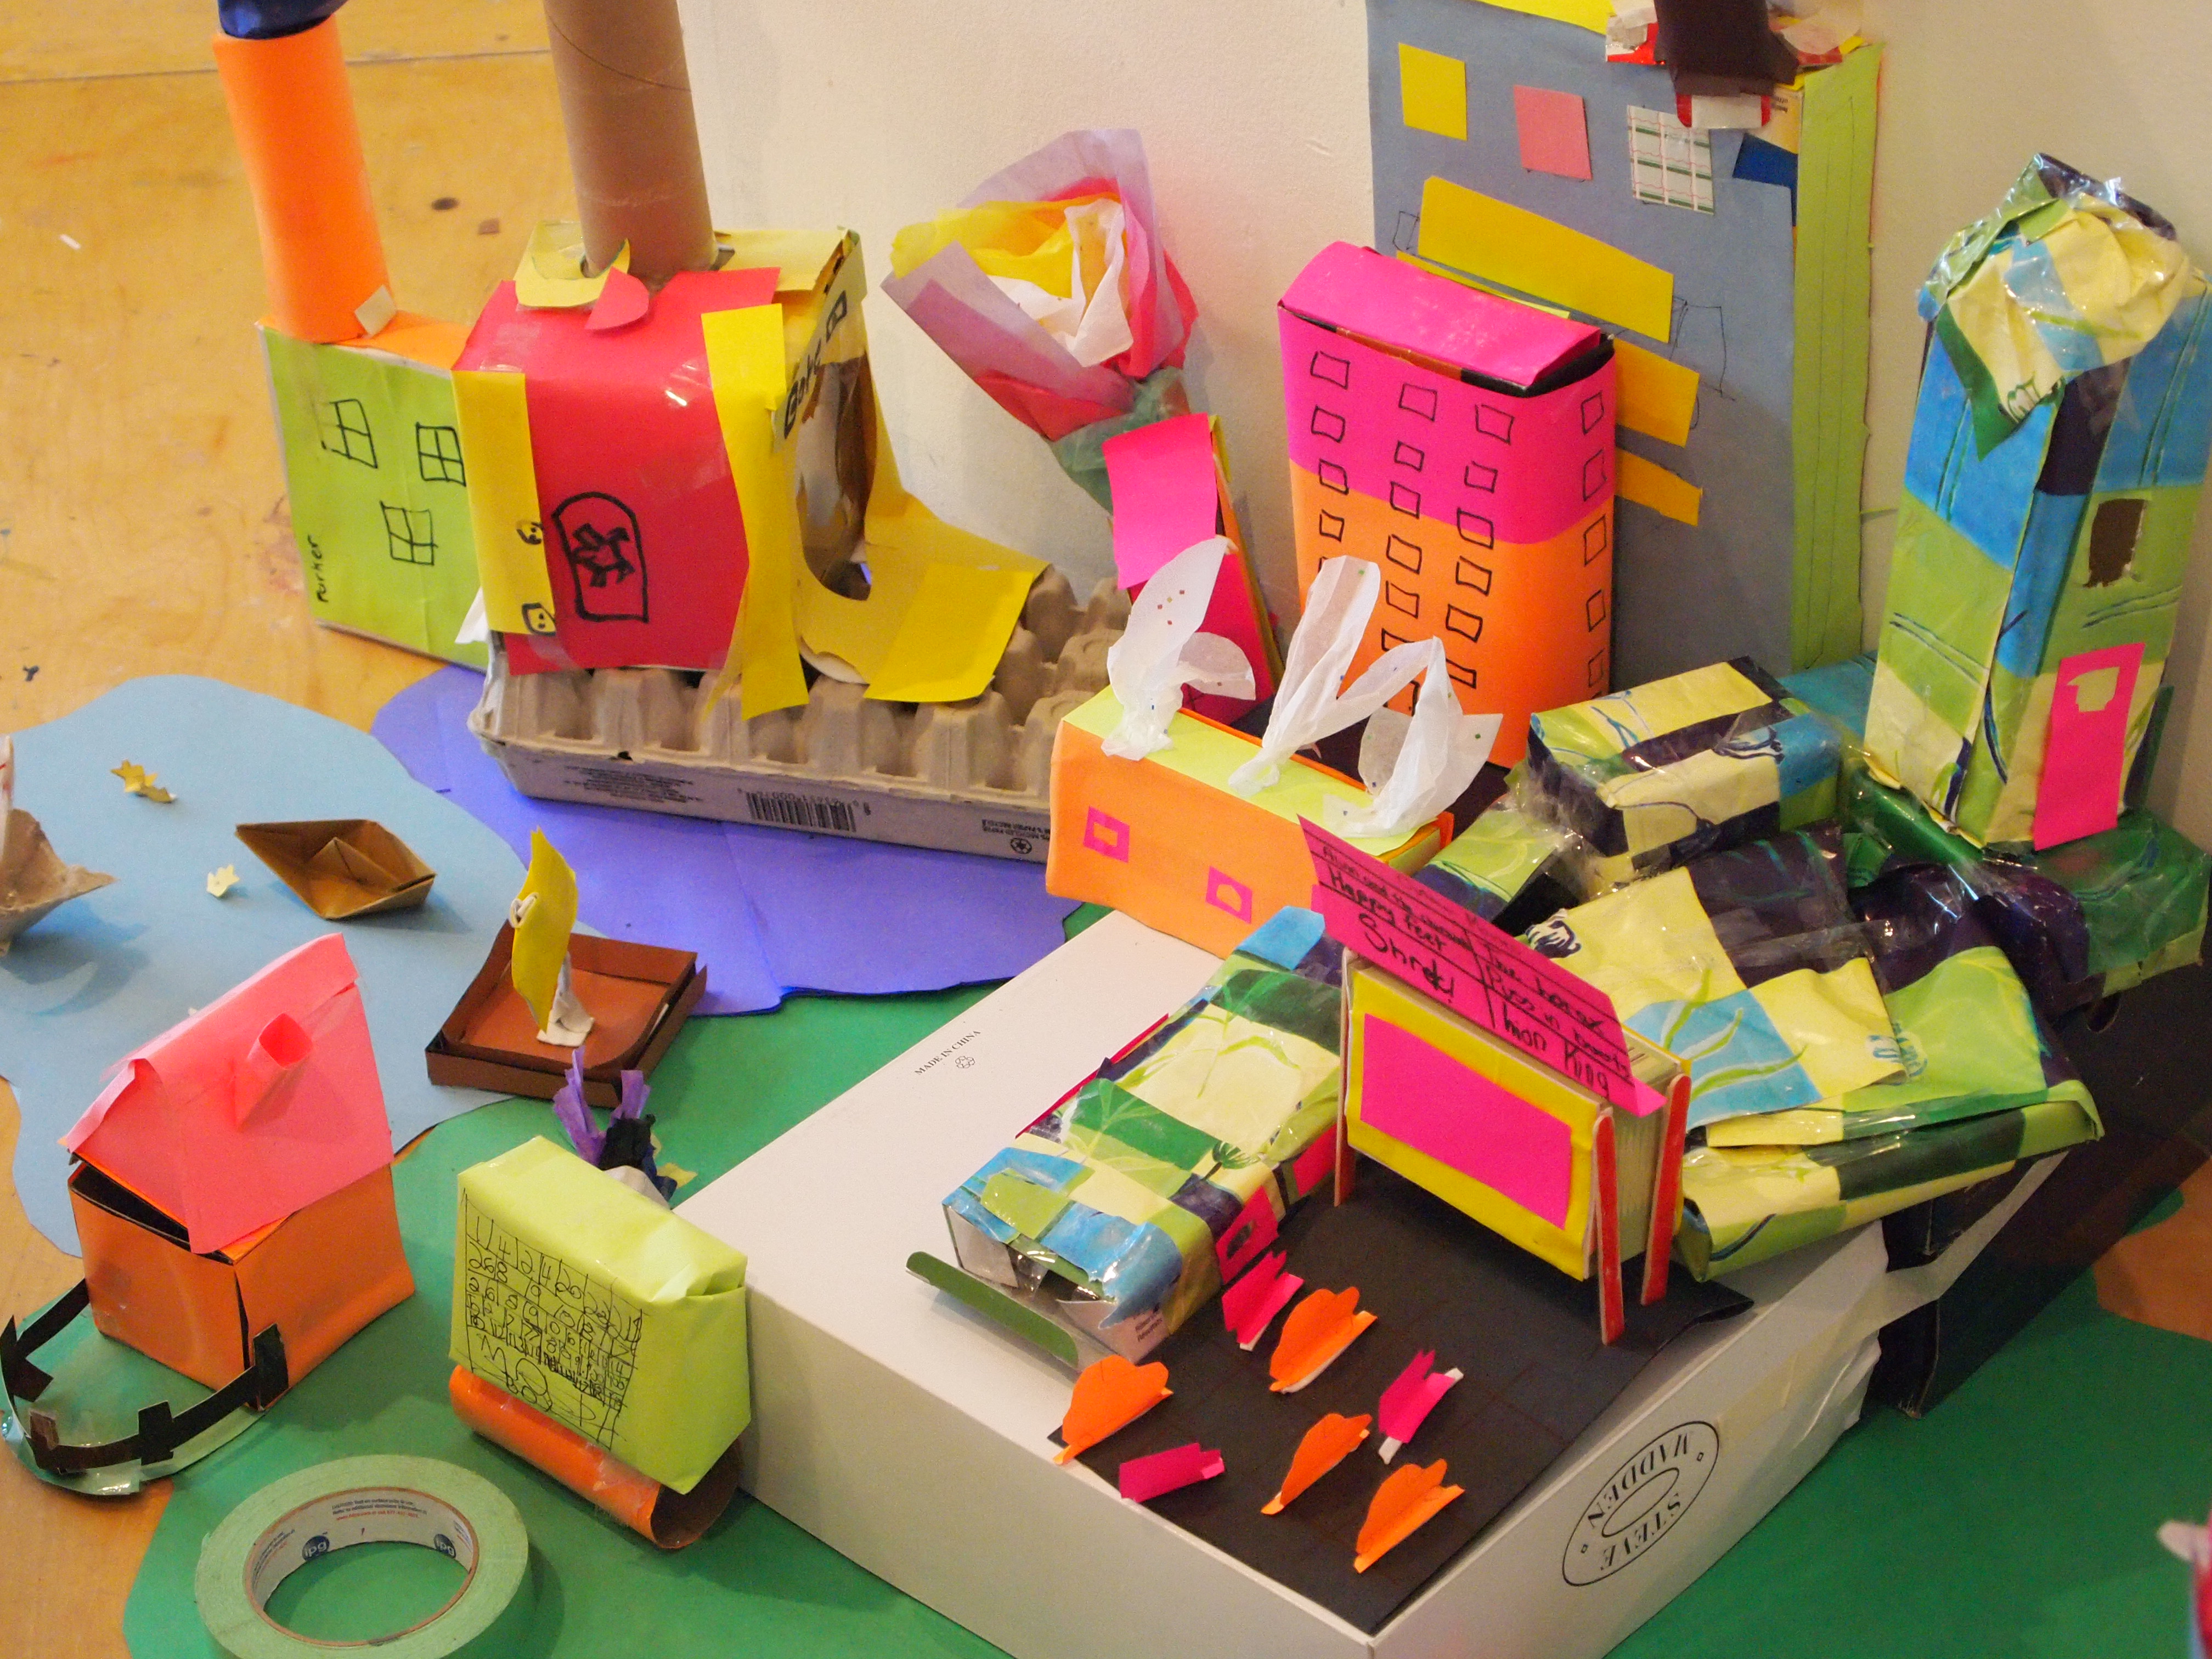 Brightly coloured craft paper in the shape of city buildings